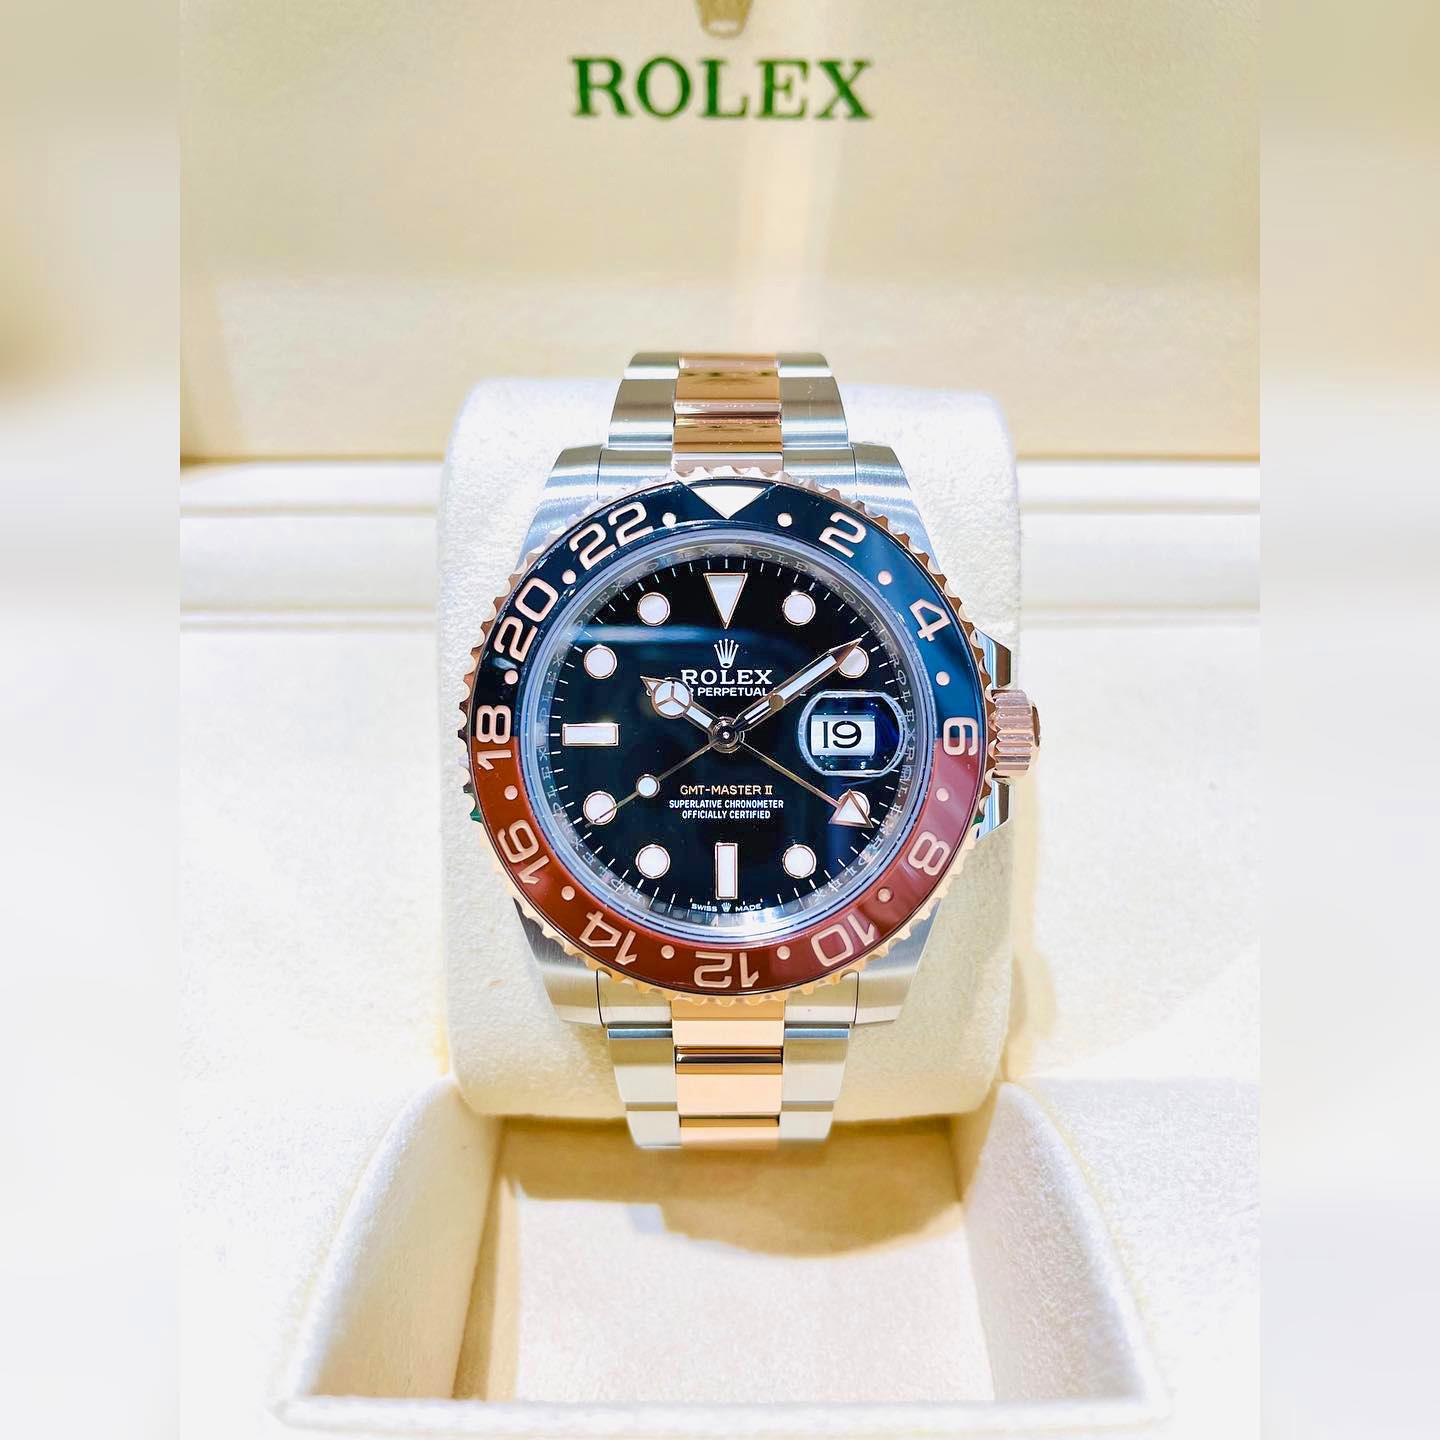 The watch is complete with the original Rolex Box and Warranty card dated 2022.

The Oyster Perpetual GMT-Master II in Everose Rolesor aka Rootbeer with a Two-Tone Oyster bracelet.

Reference 126711CHNR

MODEL CASE: Oyster, 40 mm, Oystersteel and